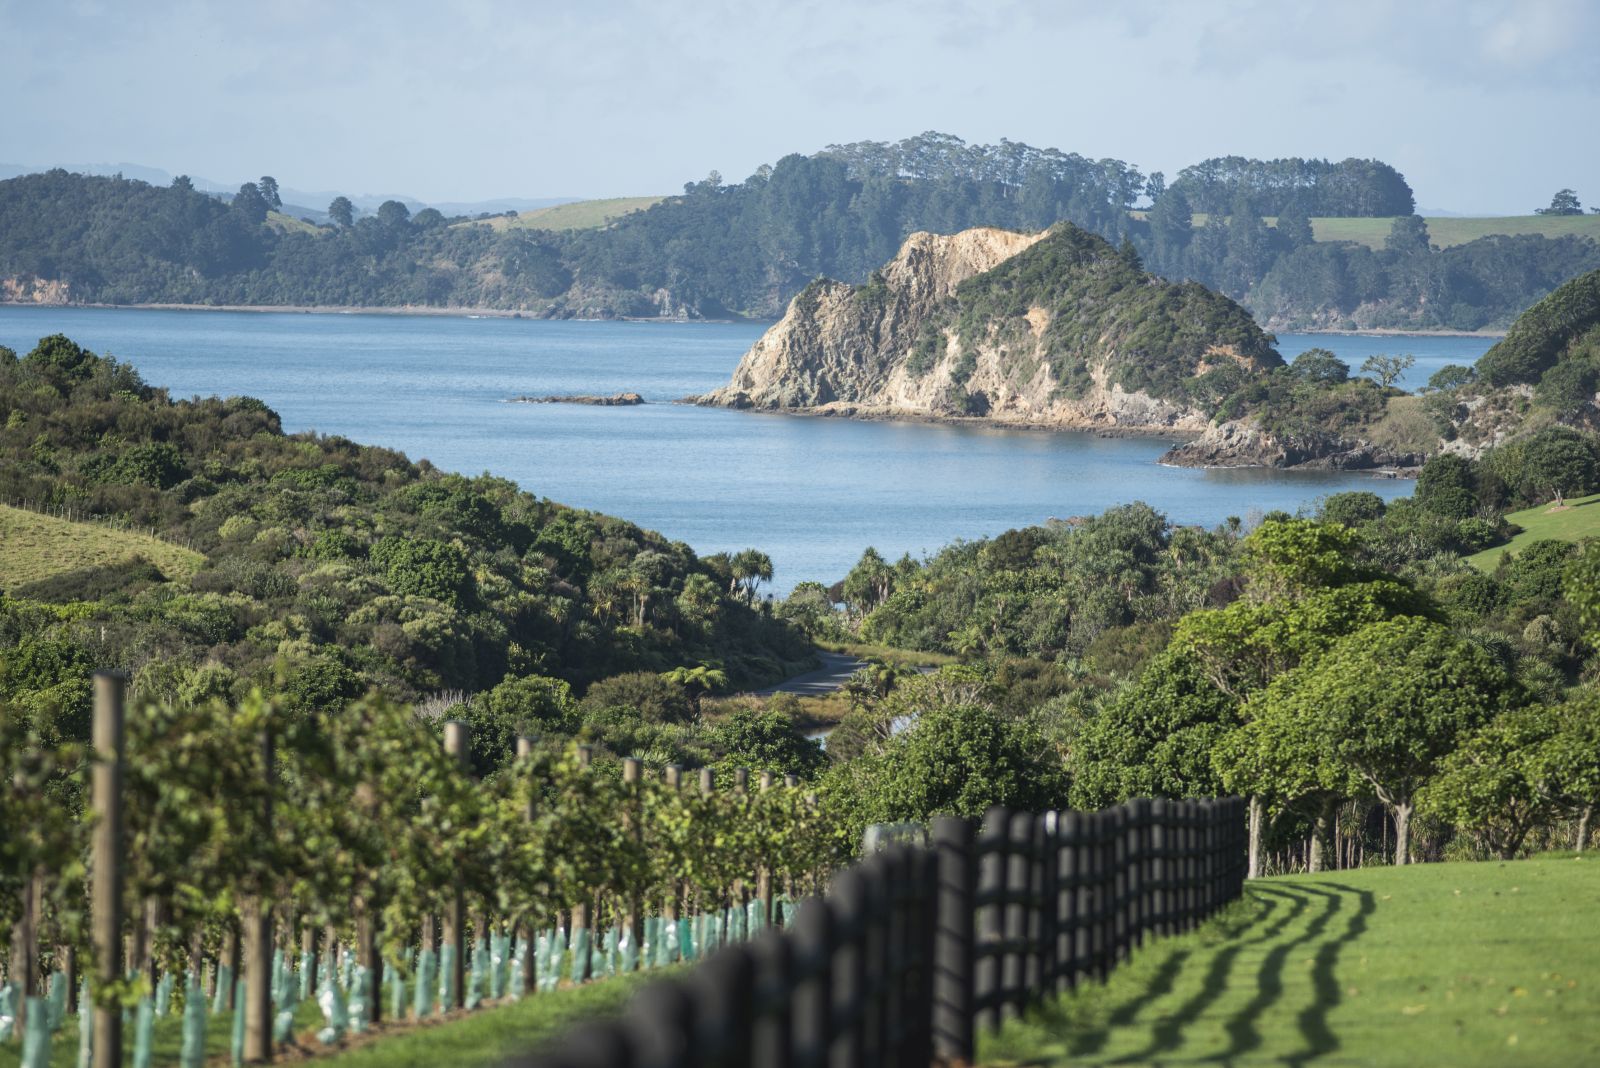 The Landing New Zealand The Vineyard views over the private vineyard and bay